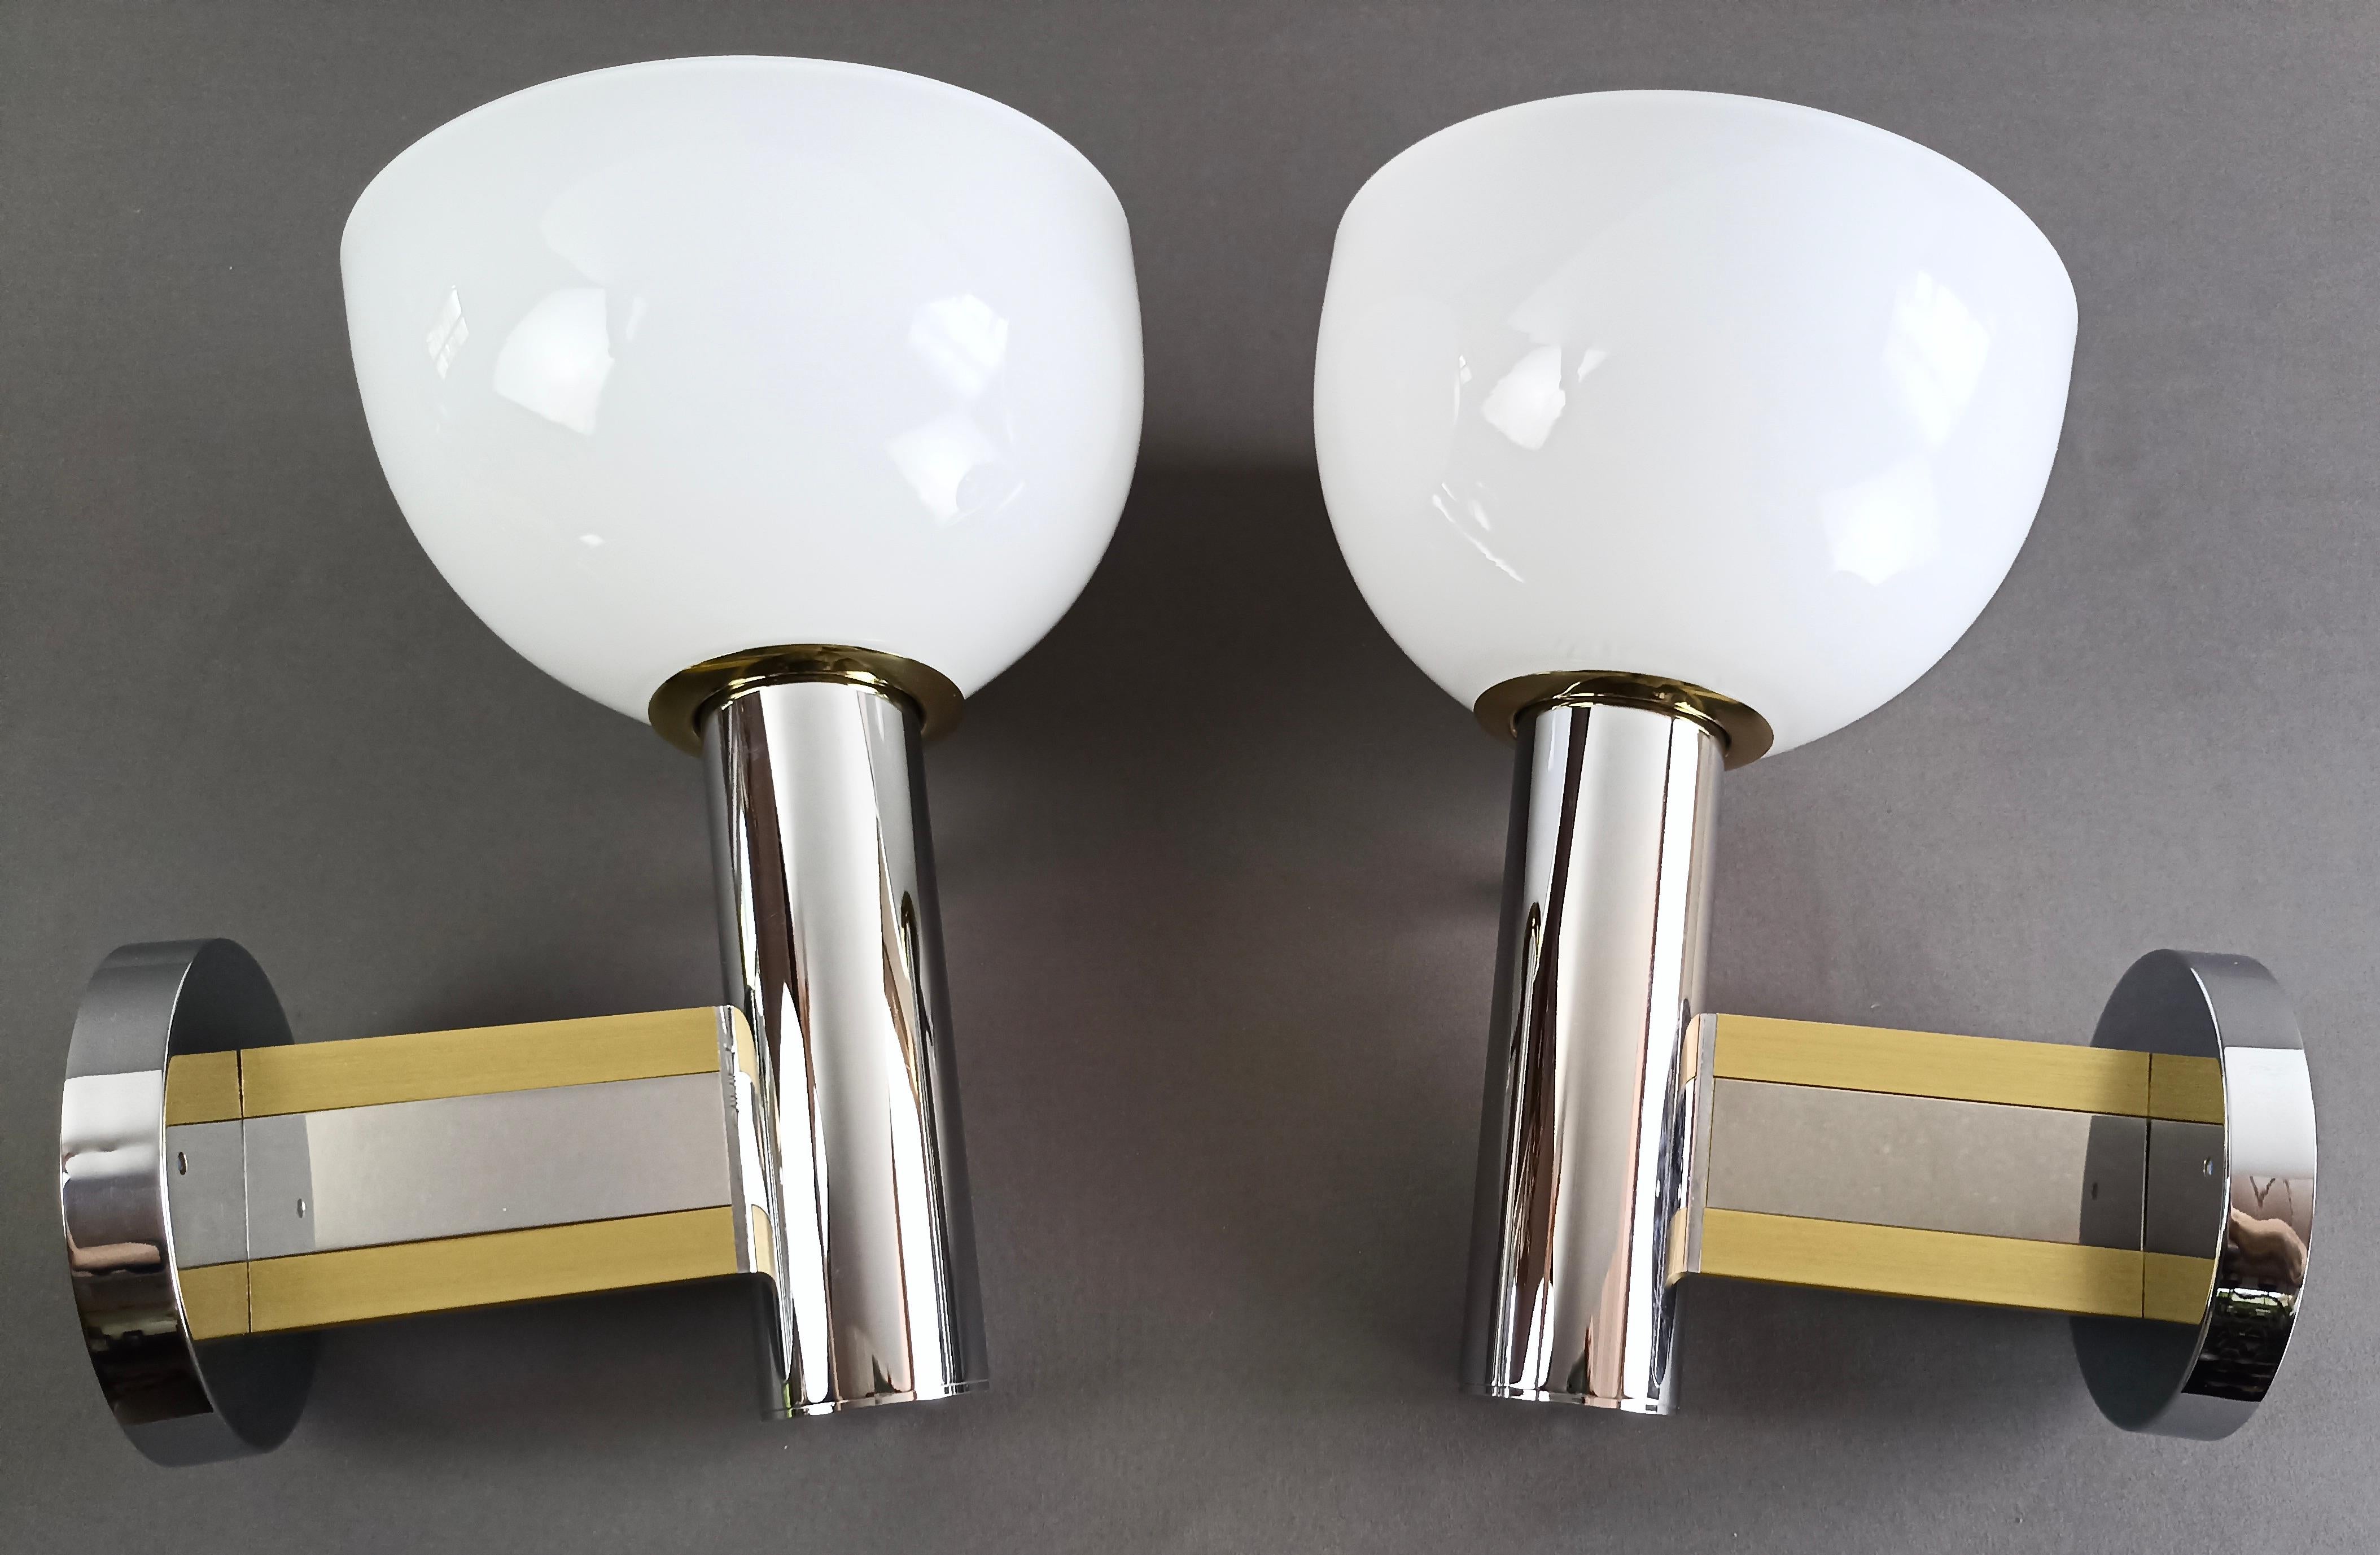 Beautiful and rare pair of wall lamps by Gaetano Sciolari, new and never used, coming directly from a old warehouse still packed in the original box.
The design of the chrome metal frame is very minimalist, with gilded aluminum and brass details.